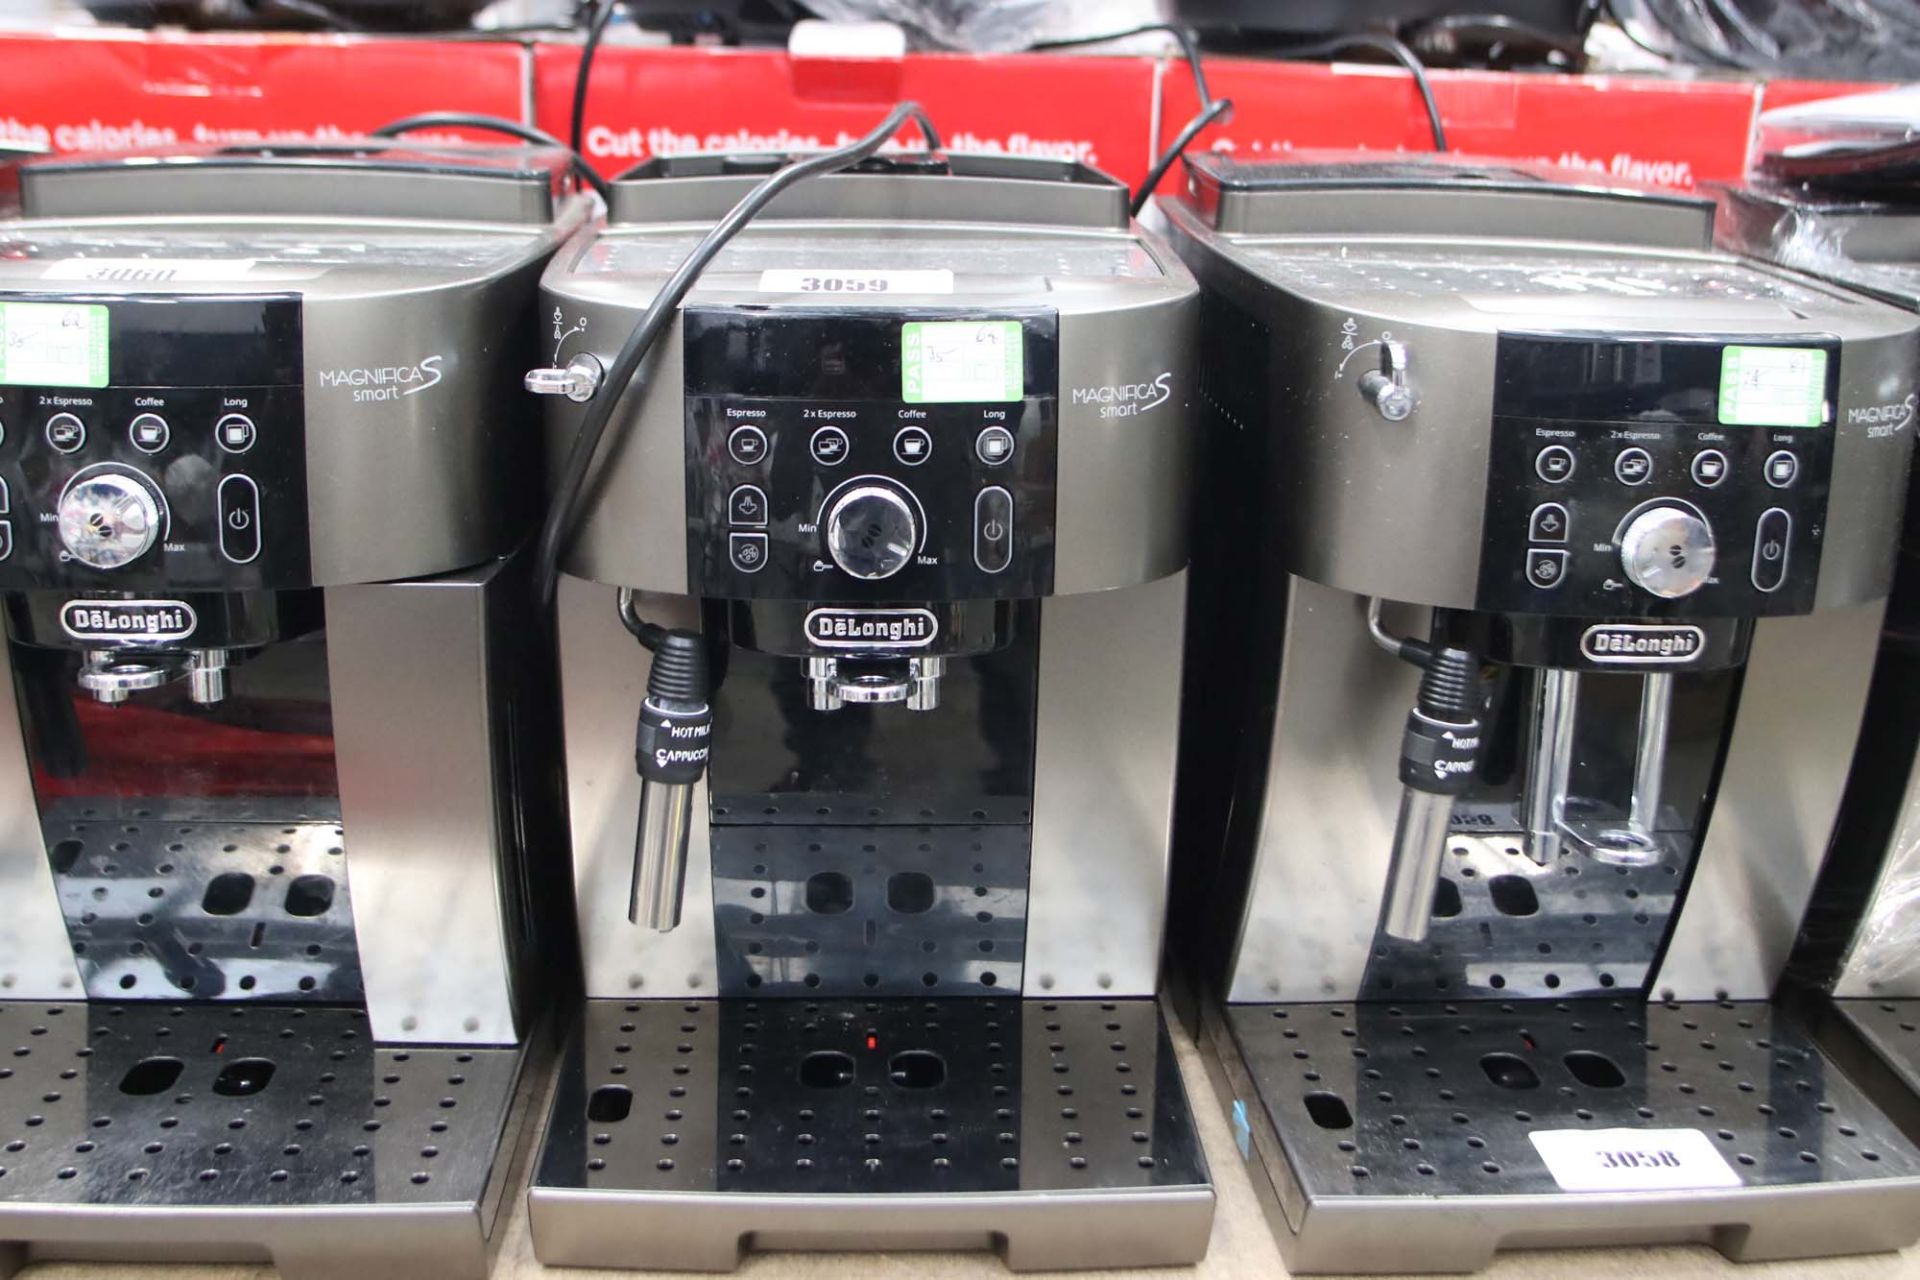 Unboxed Magnifica S Smart coffee machine (64)